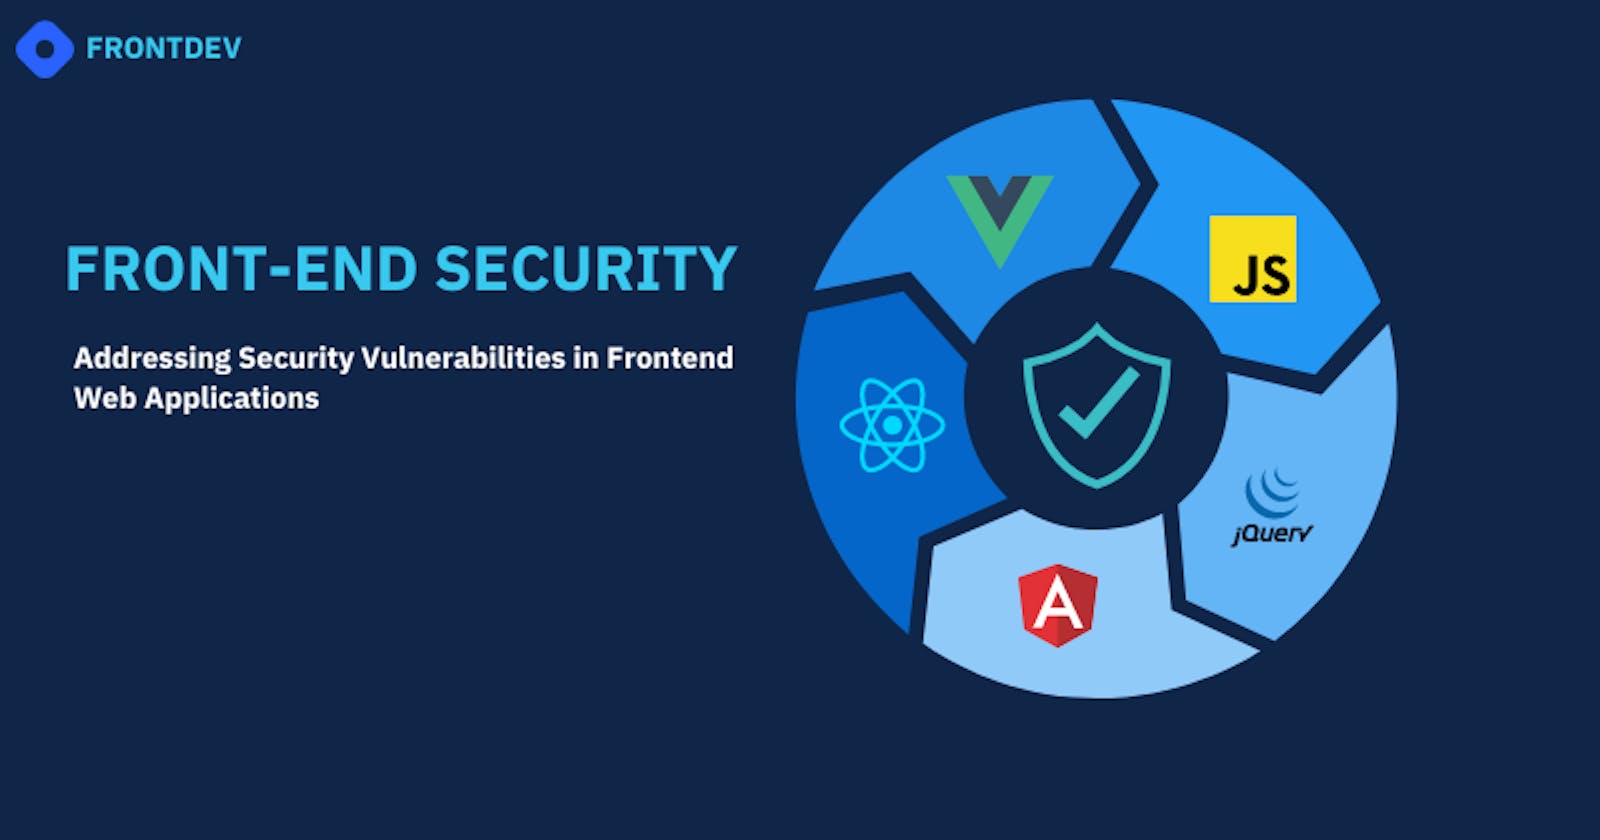 Frontend Security 101: 7 Essential Tips and Techniques for Keeping Your Application Safe